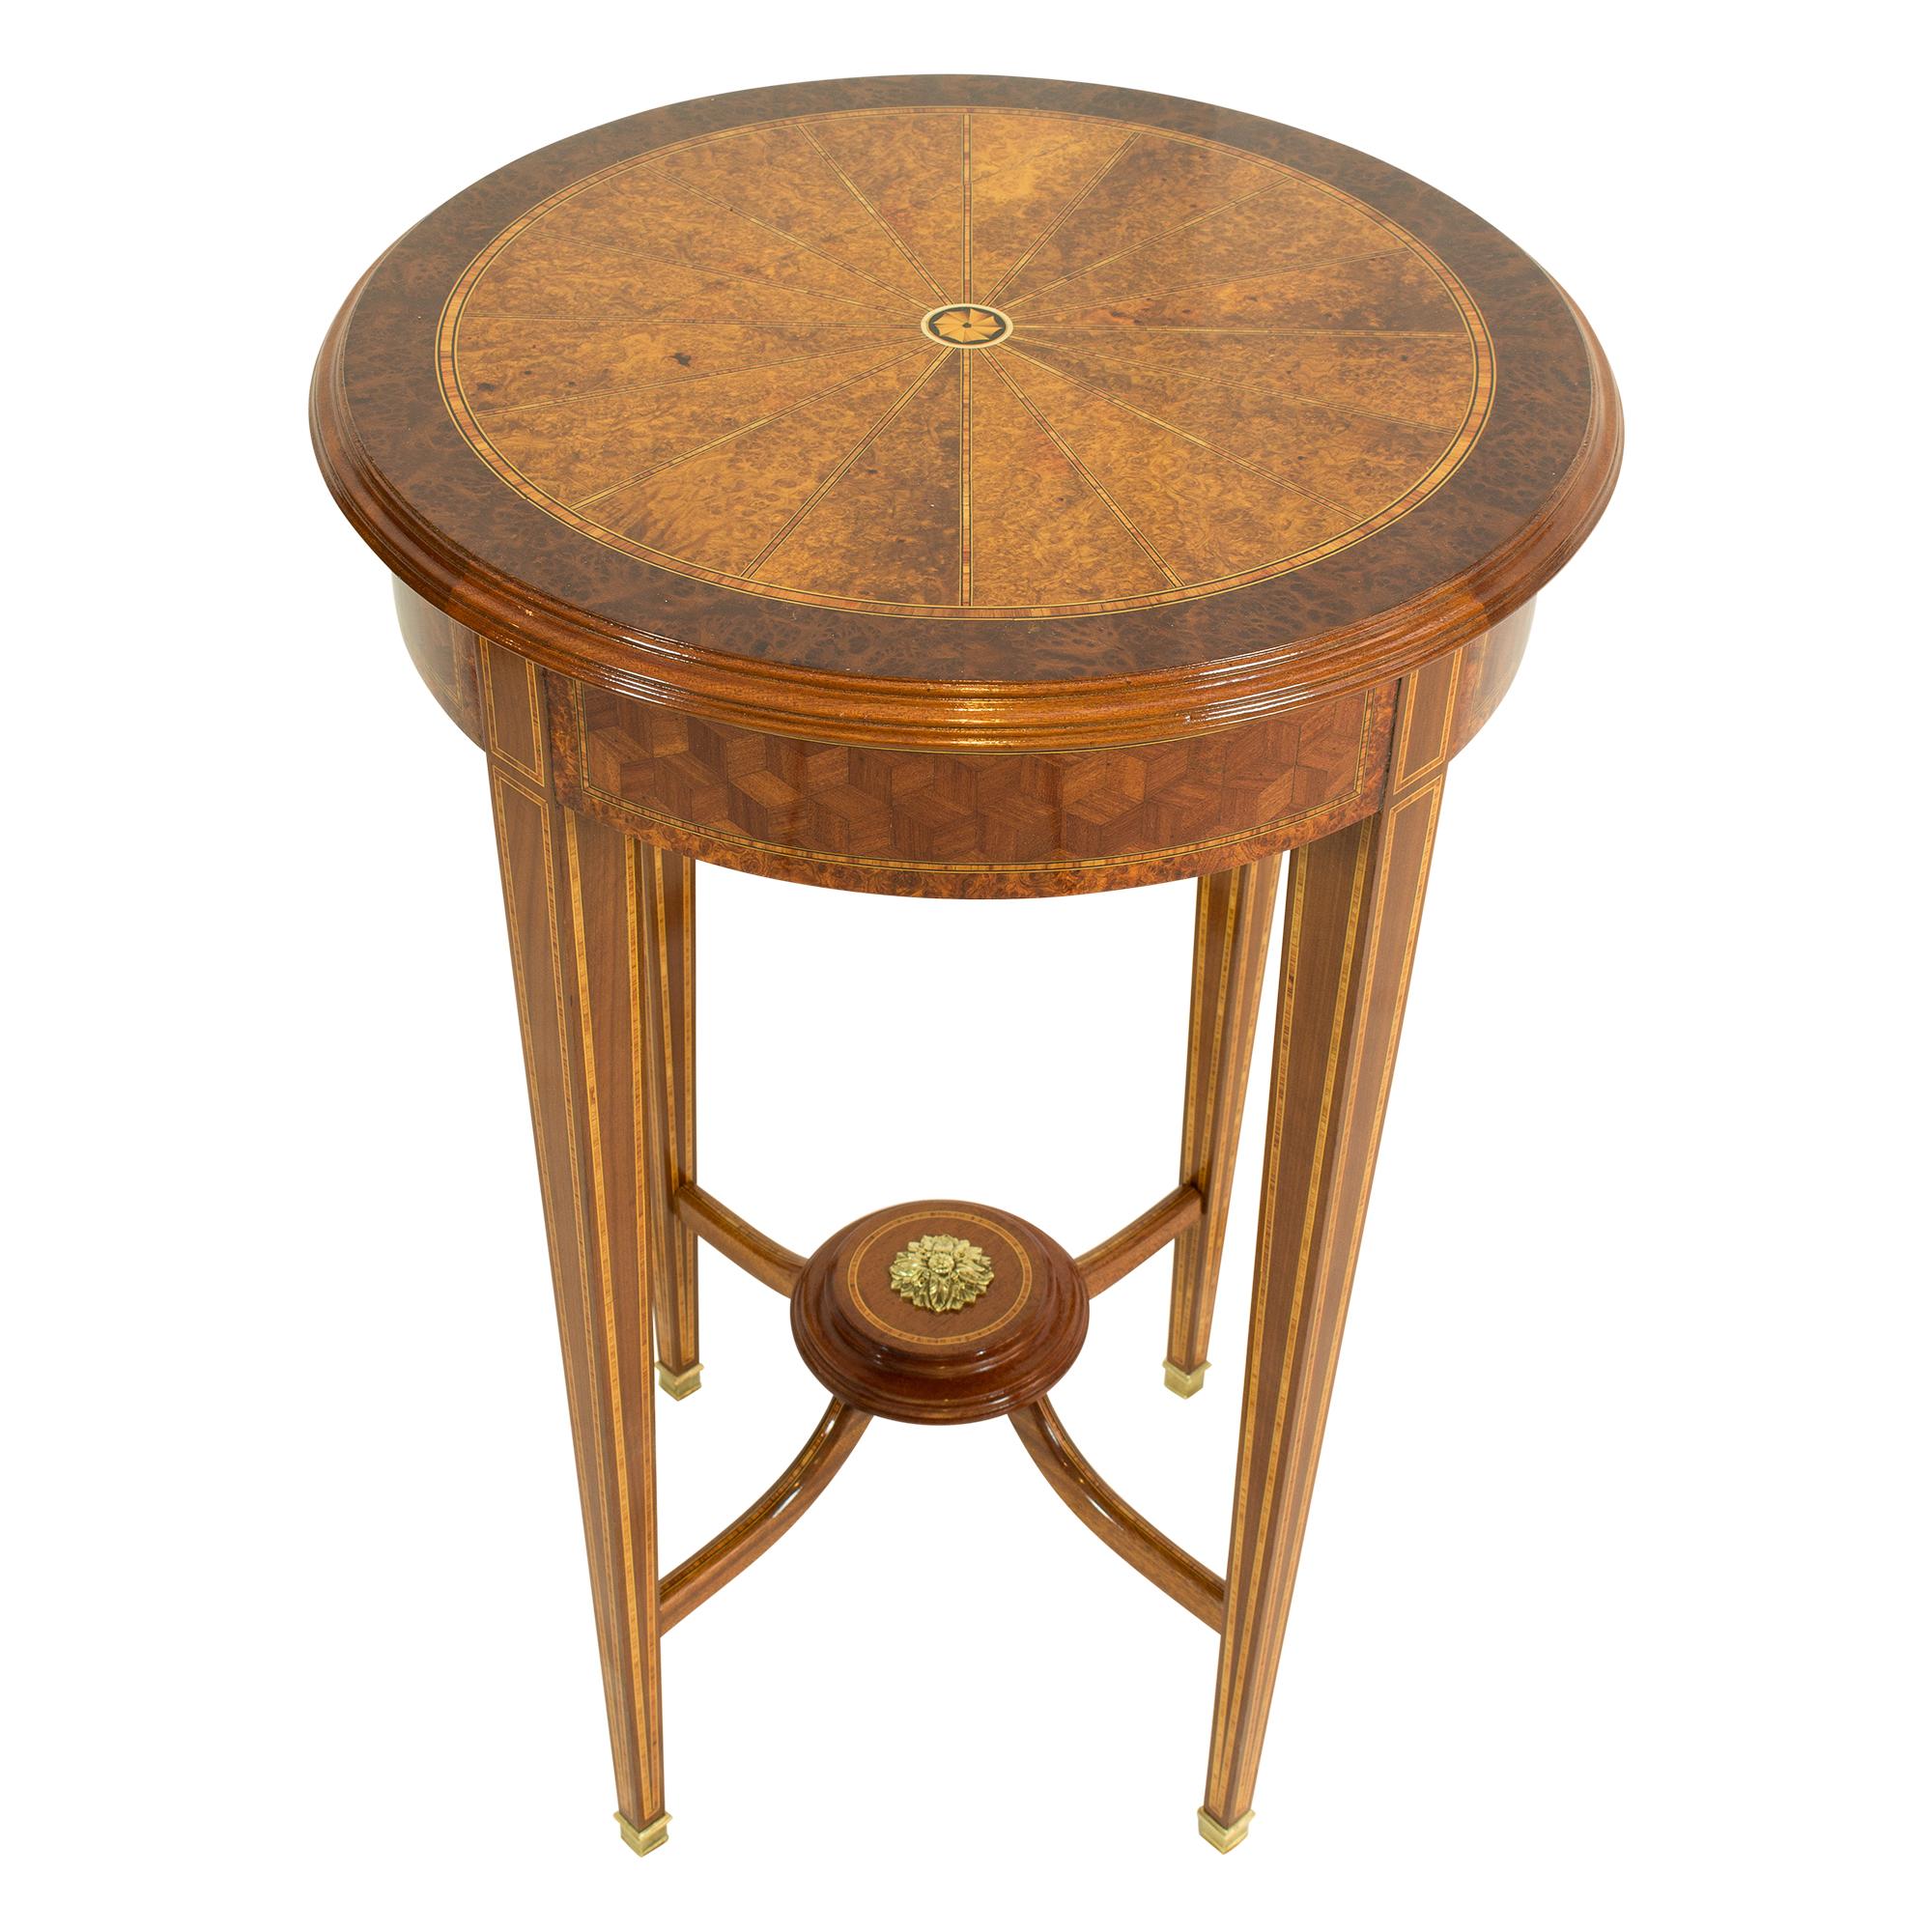 Beautiful simple side table from the Edwardian period circa 1900 from England. The table is made of walnut/nutwood and decorated with band inlays and cubes marquetry in different woods. Feet are edged with brass shoes. The table is in a very good